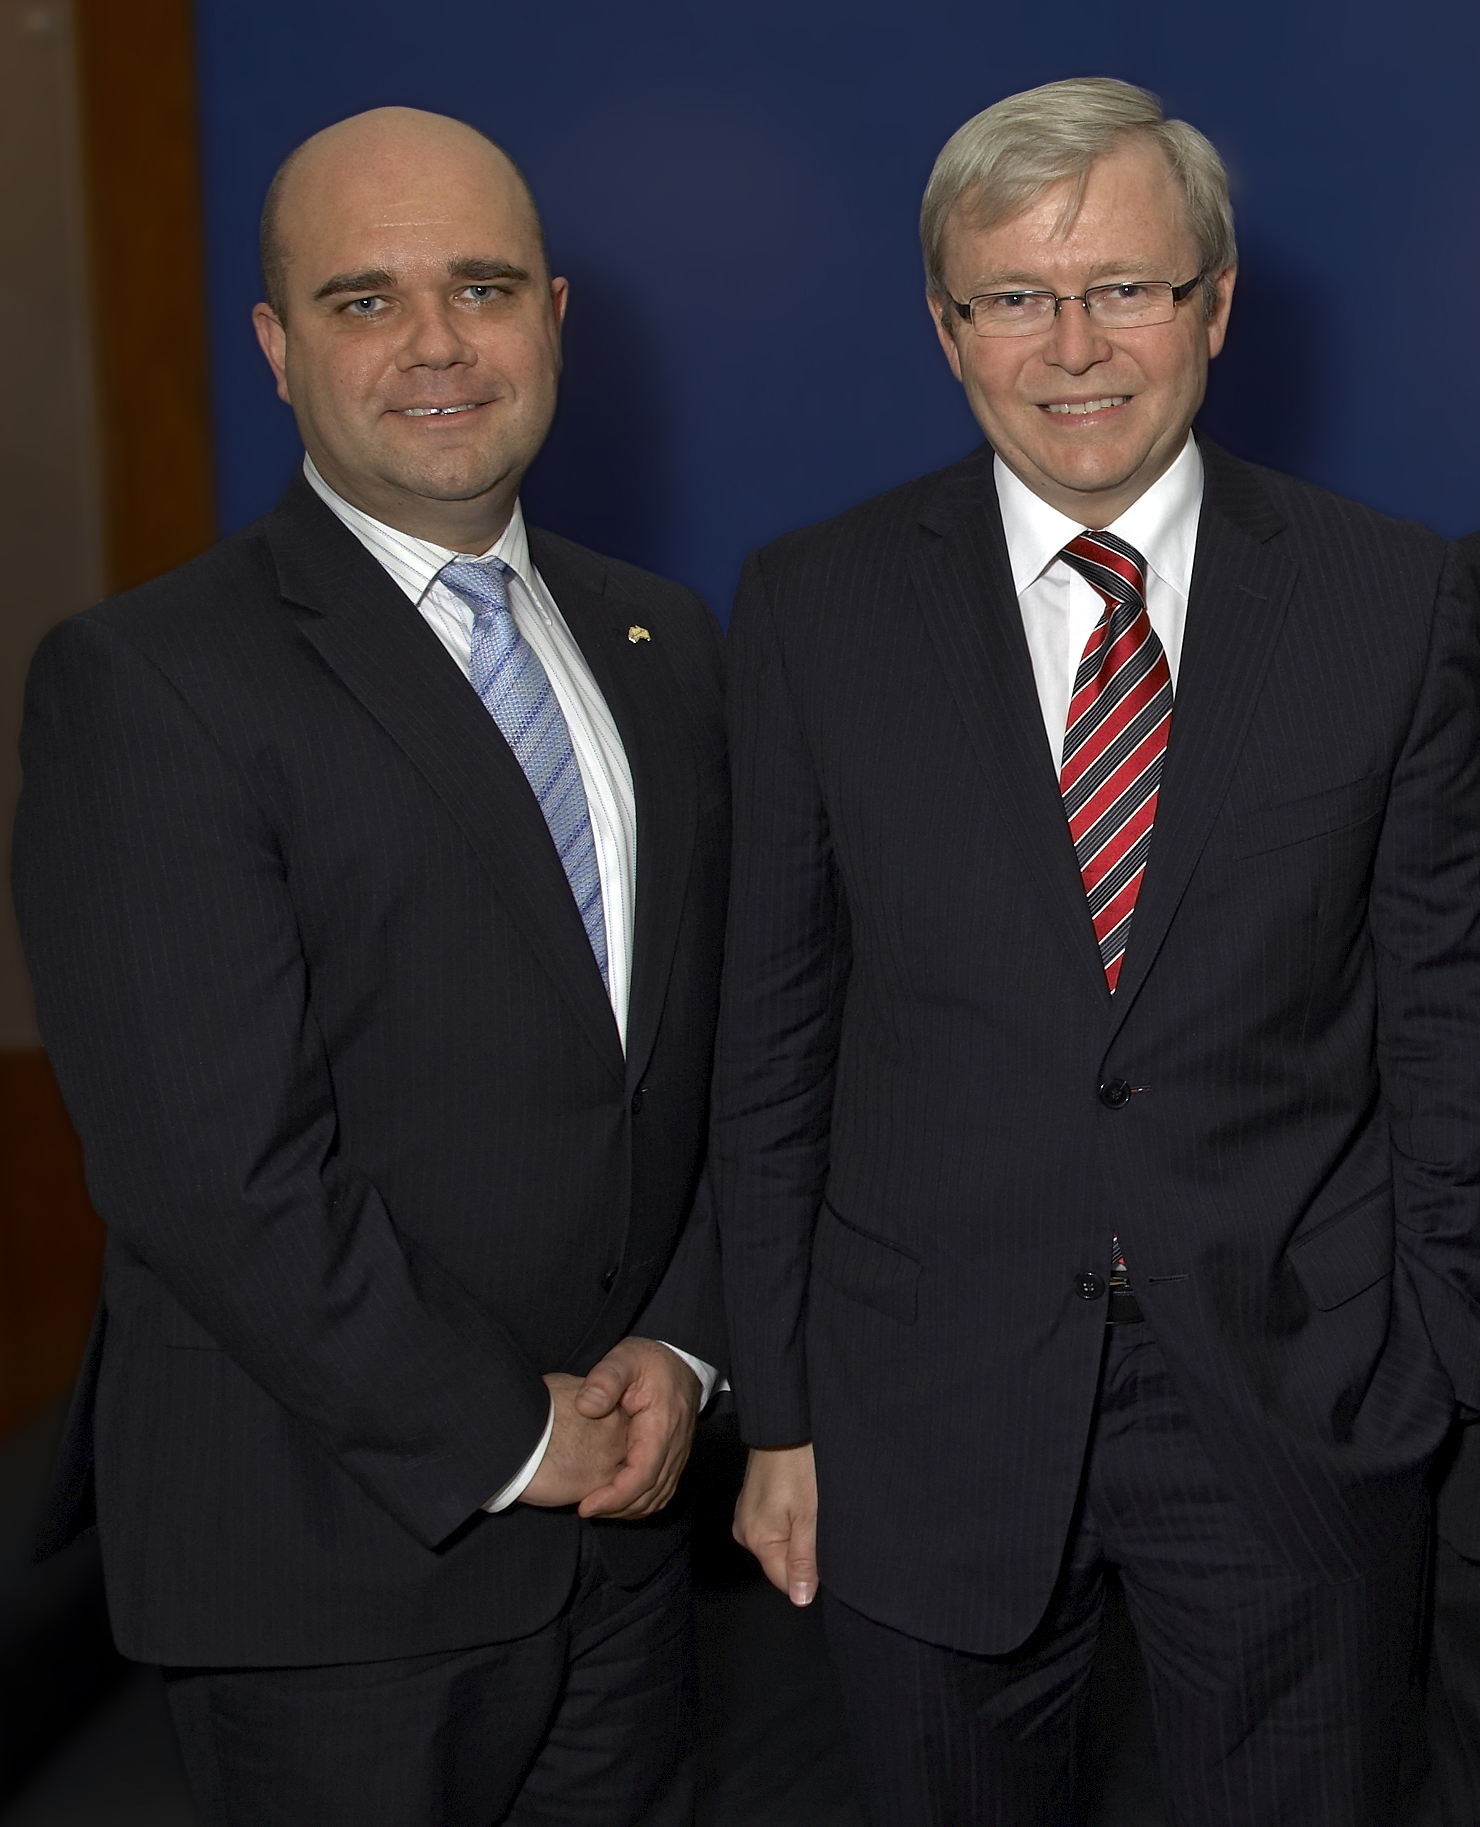 Bradley Woods with Prime Minister Rudd